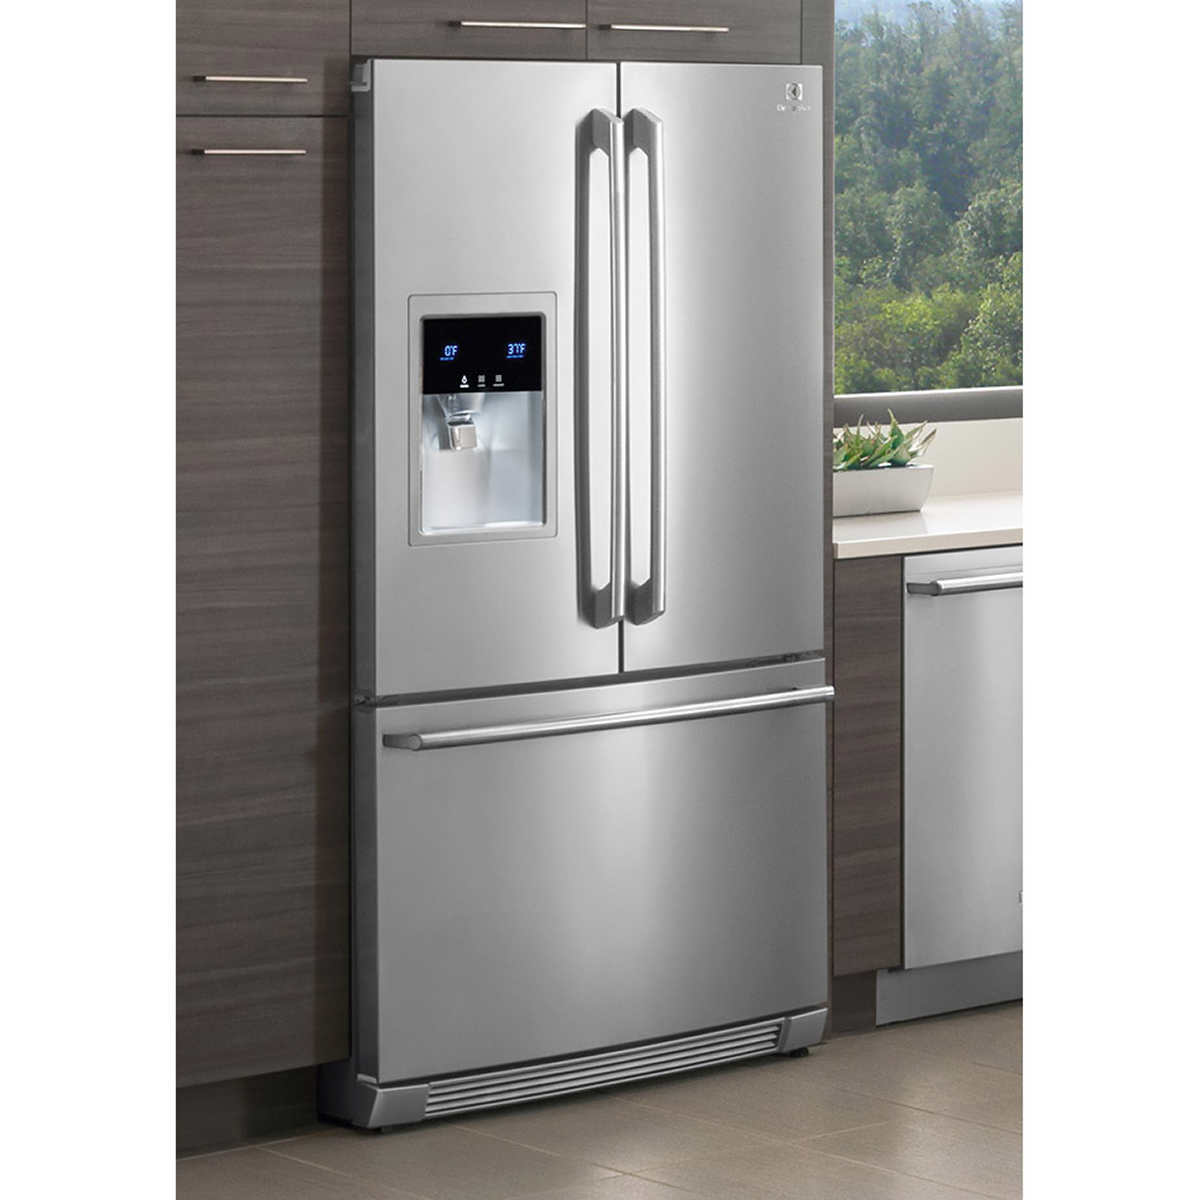 Refrigerators | Costco - Electrolux 36- in. 21.6 cu.ft. Counter Depth French Door Refrigerator with